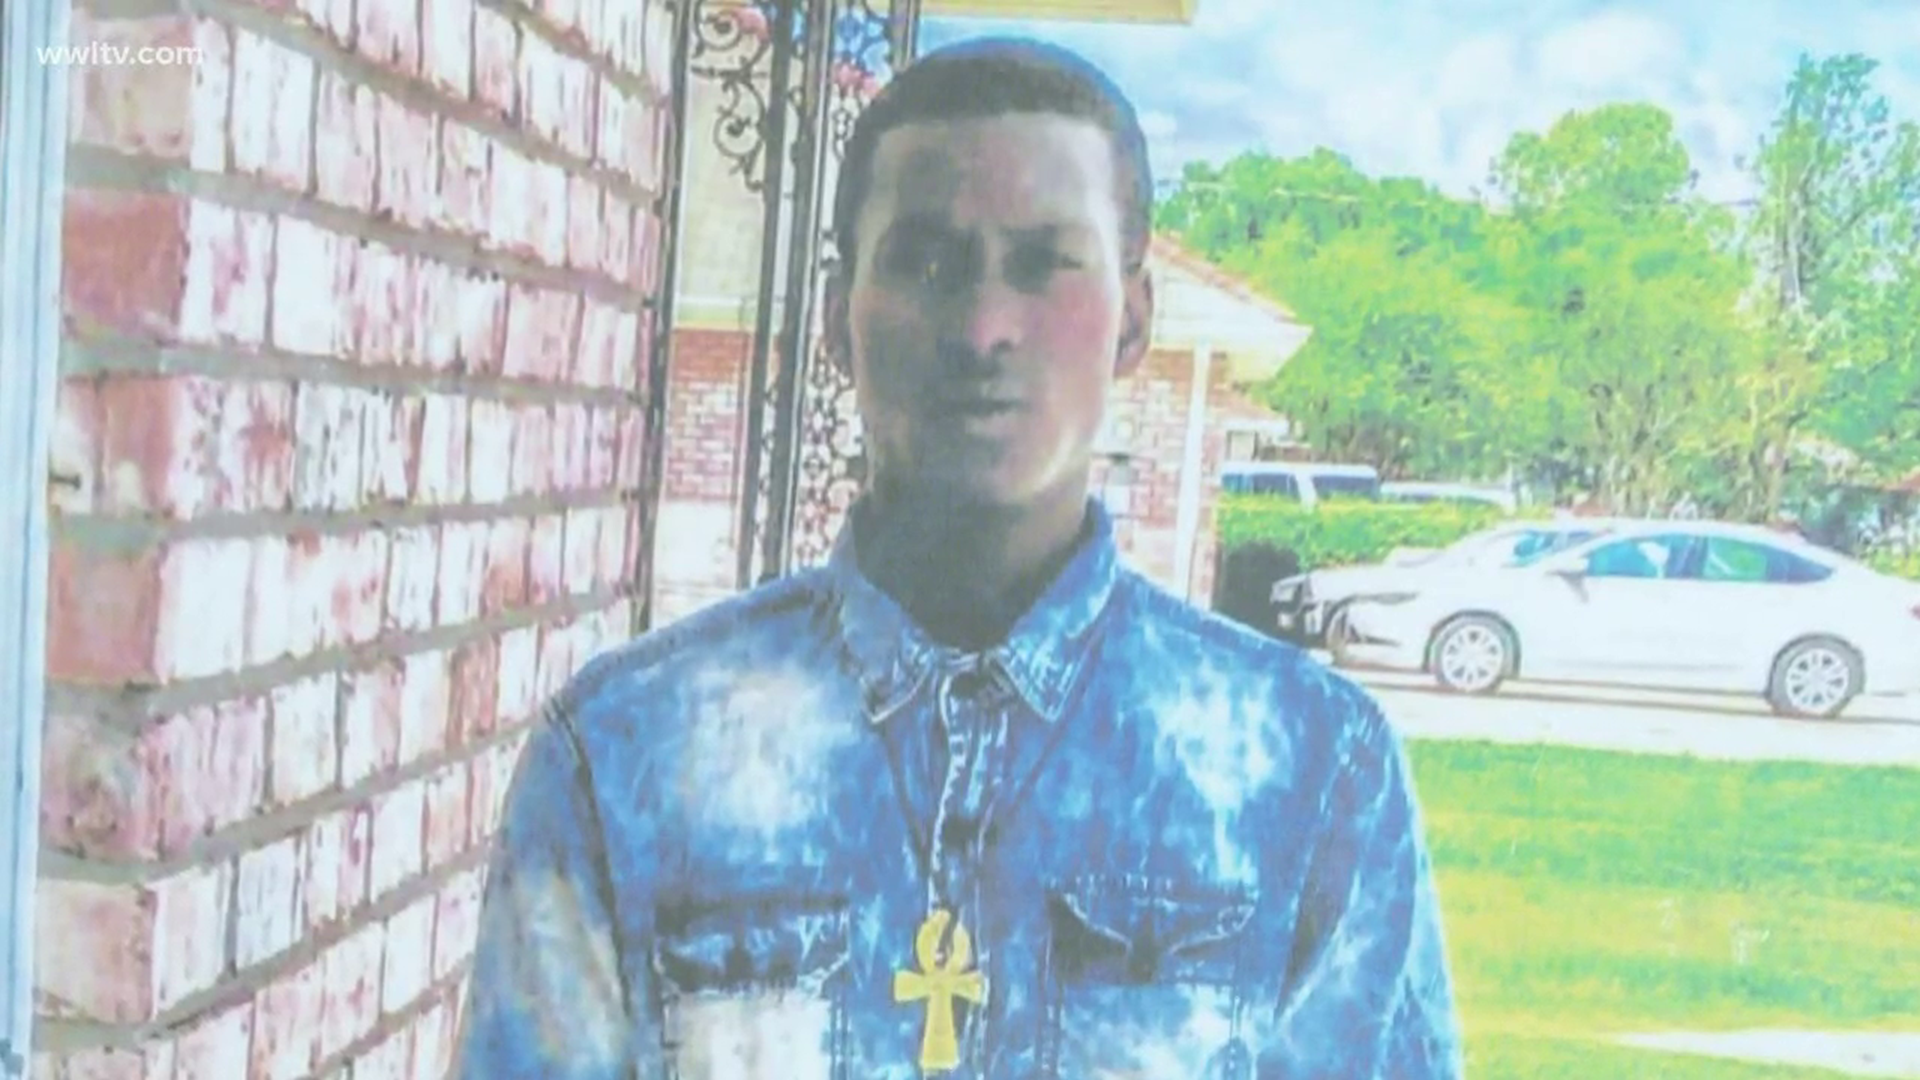 Robinson died after being captured by four JPSO narcotics agents.